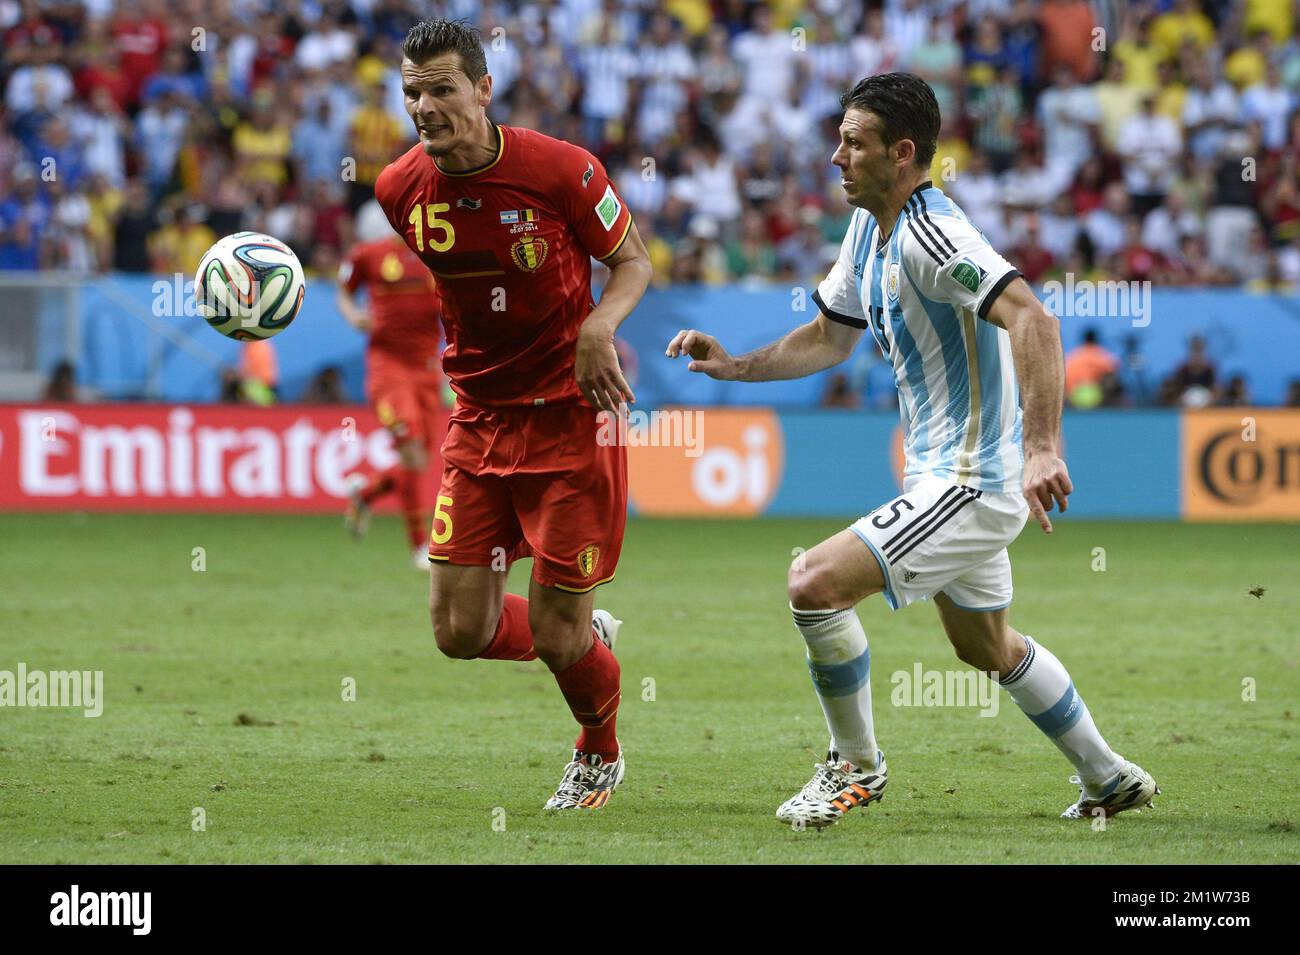 Argentina's Martin Demichelis and Belgium's Daniel Van Buyten fight for the ball during the quarter final match between Belgian national soccer team Red Devils and Argentina, in Estadio Nacional Mane Garrincha, in Brasilia, Brazil, during the 2014 FIFA World Cup, Saturday 05 July 2014.  Stock Photo